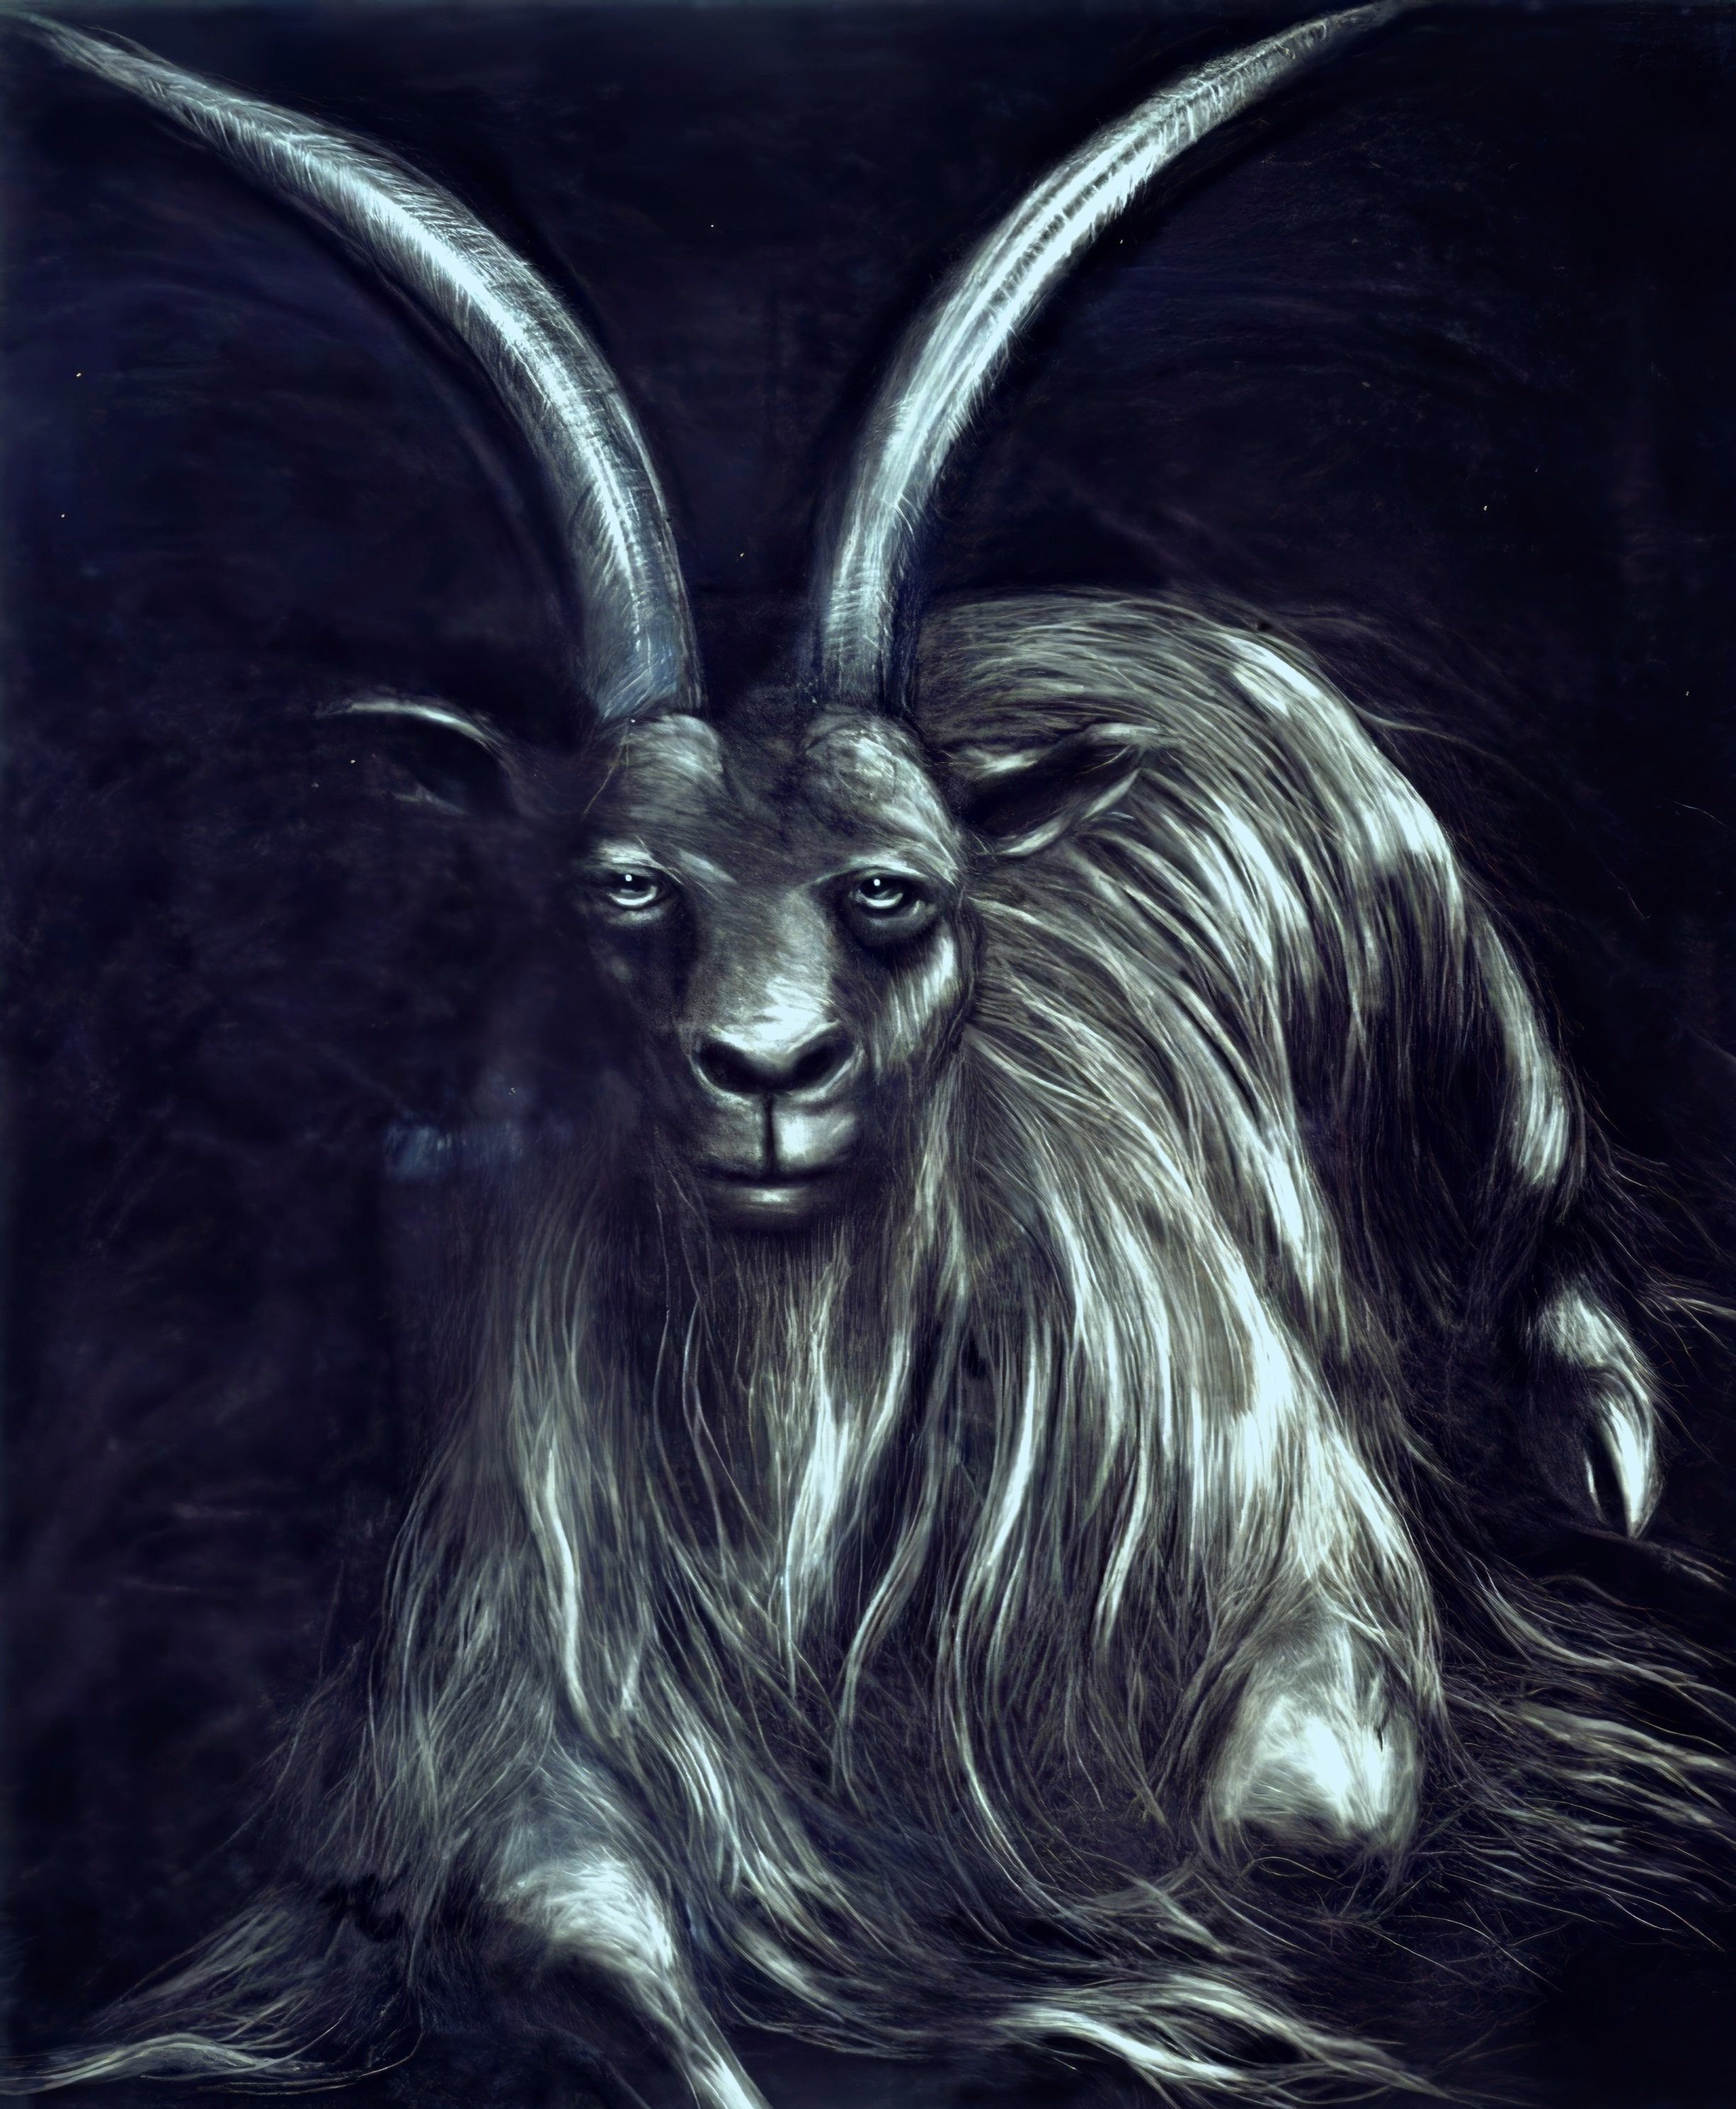  Billy Goat, 50” x 60”, pastel on paper 